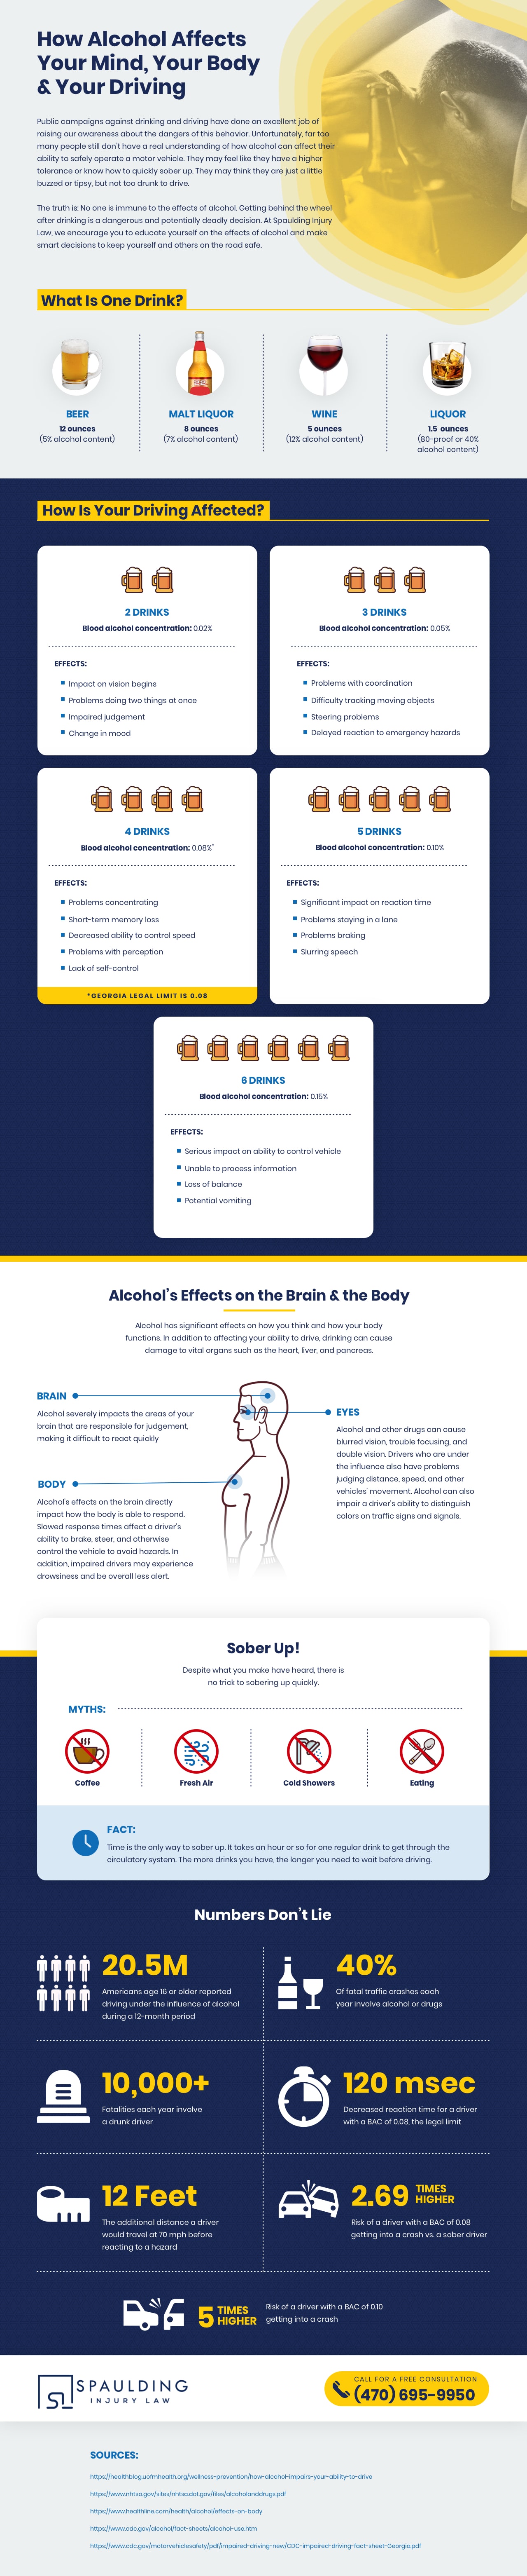 How Alcohol Affects Your Mind And Body Infographic - Spaulding Injury Law